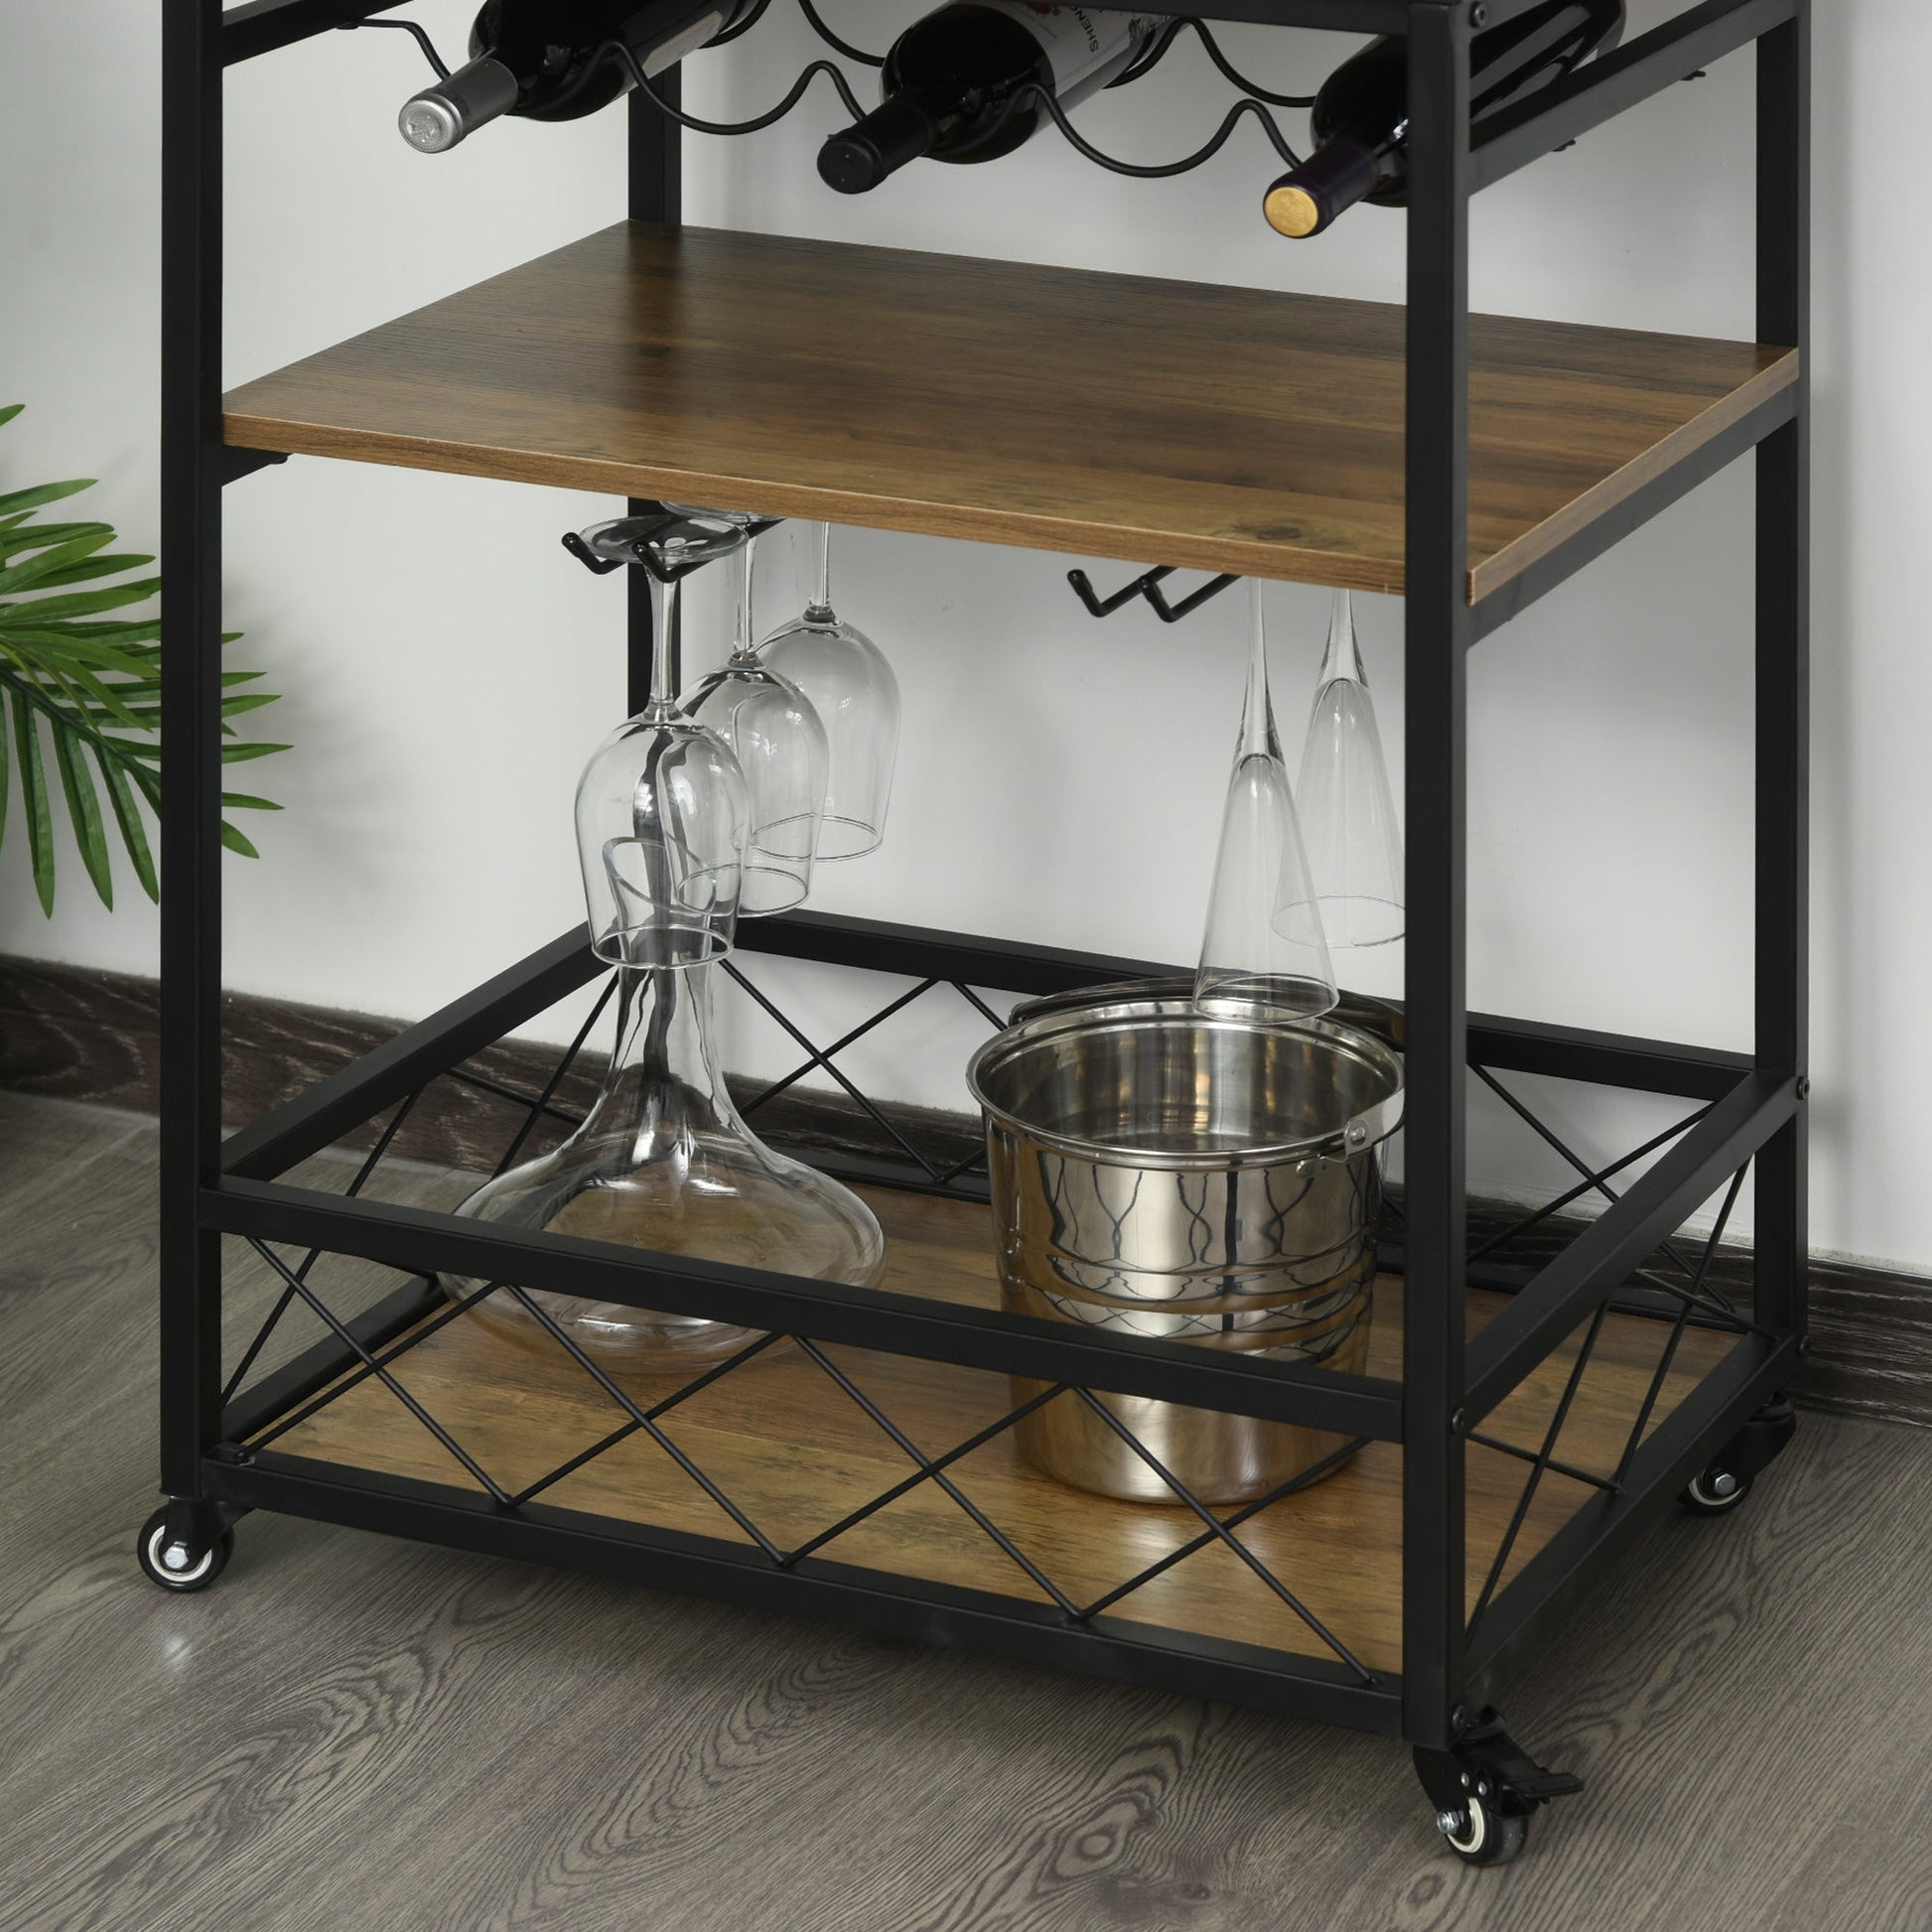 Retro Industrial Bar Serving Cart Rolling Kitchen Island Storage Utility Trolley with 5-bottle Wine Rack &; Serving Tray - Gallery Canada